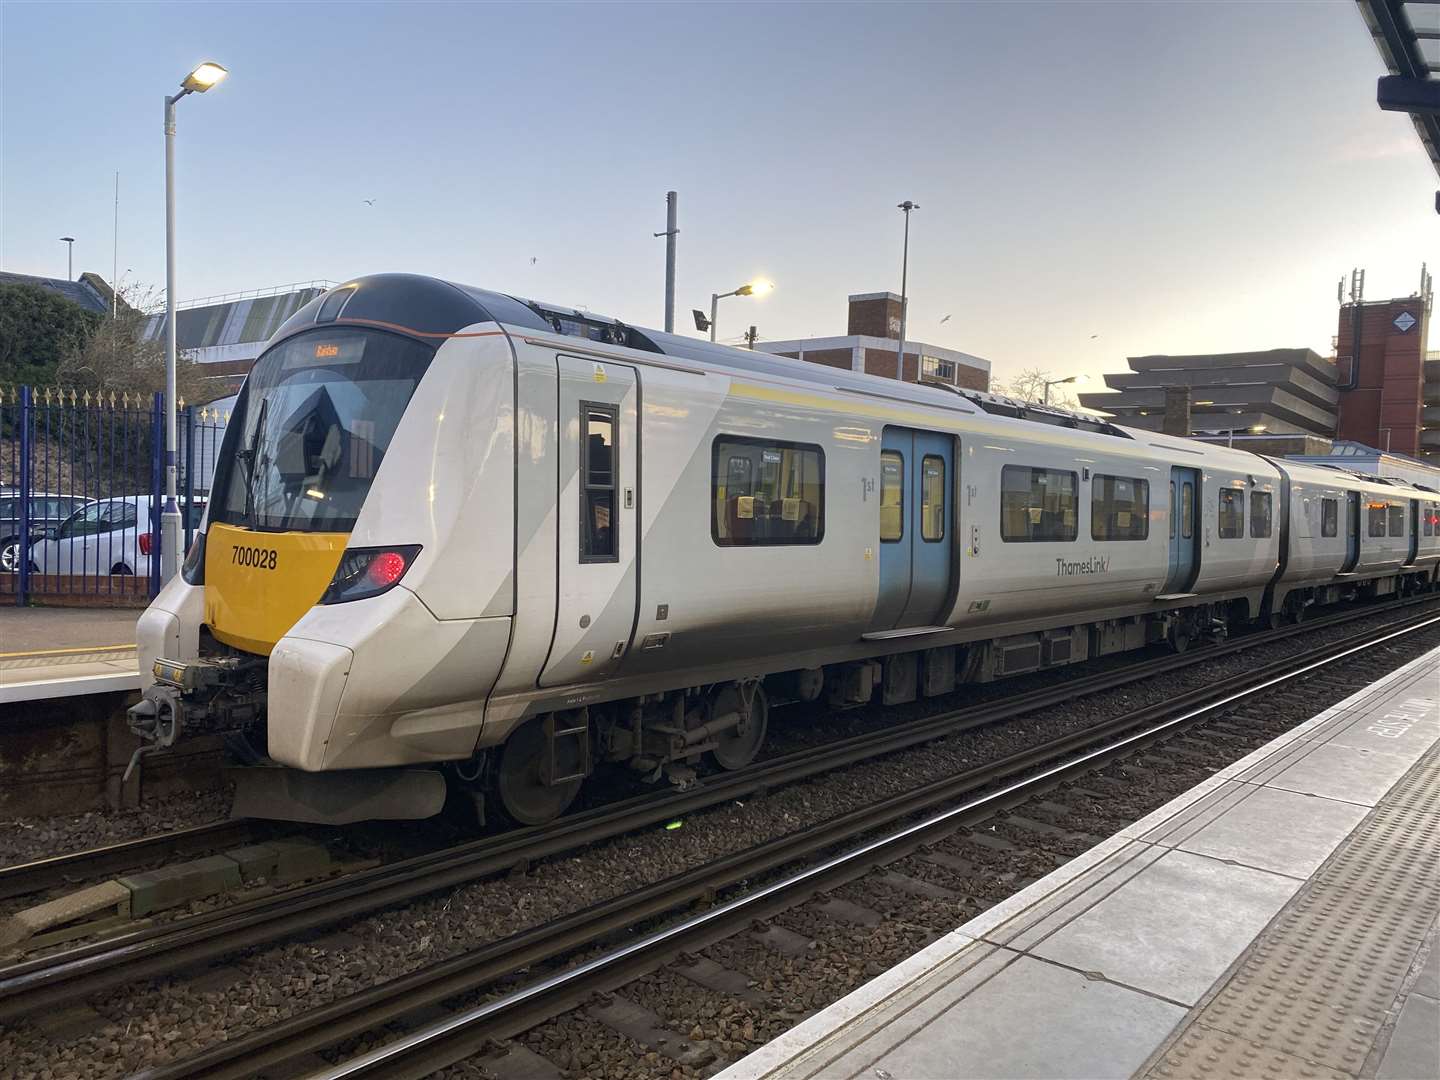 Thameslink are issuing a reduced timetable next week